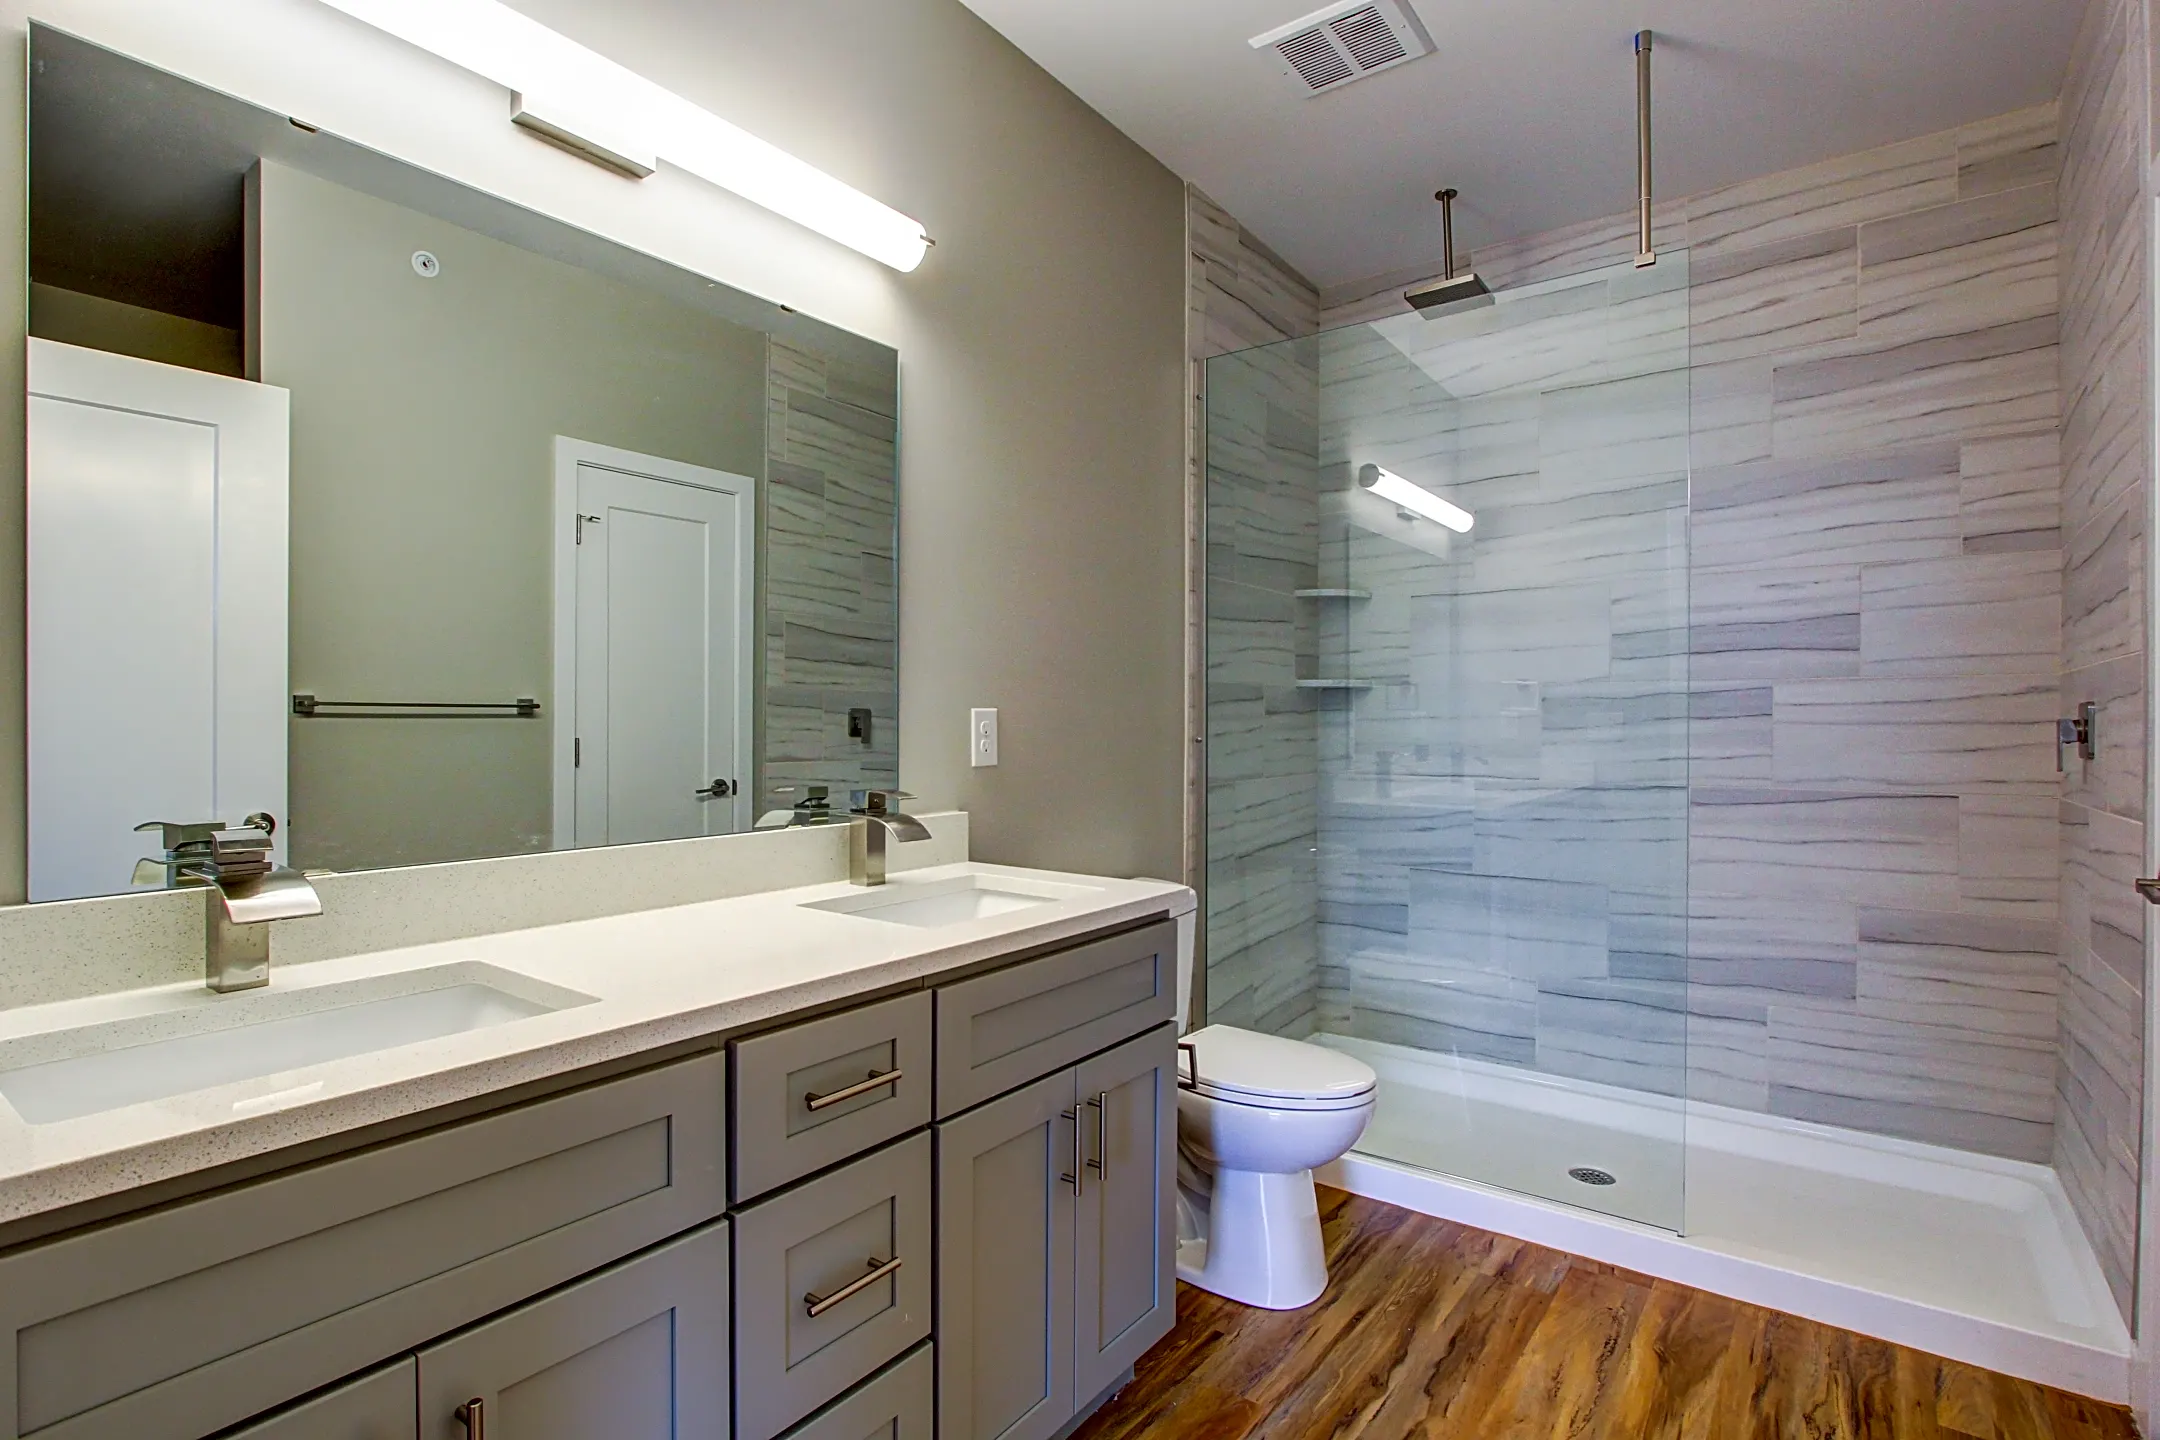 Bathroom - The Residences at Chagrin Riverwalk East - Willoughby, OH